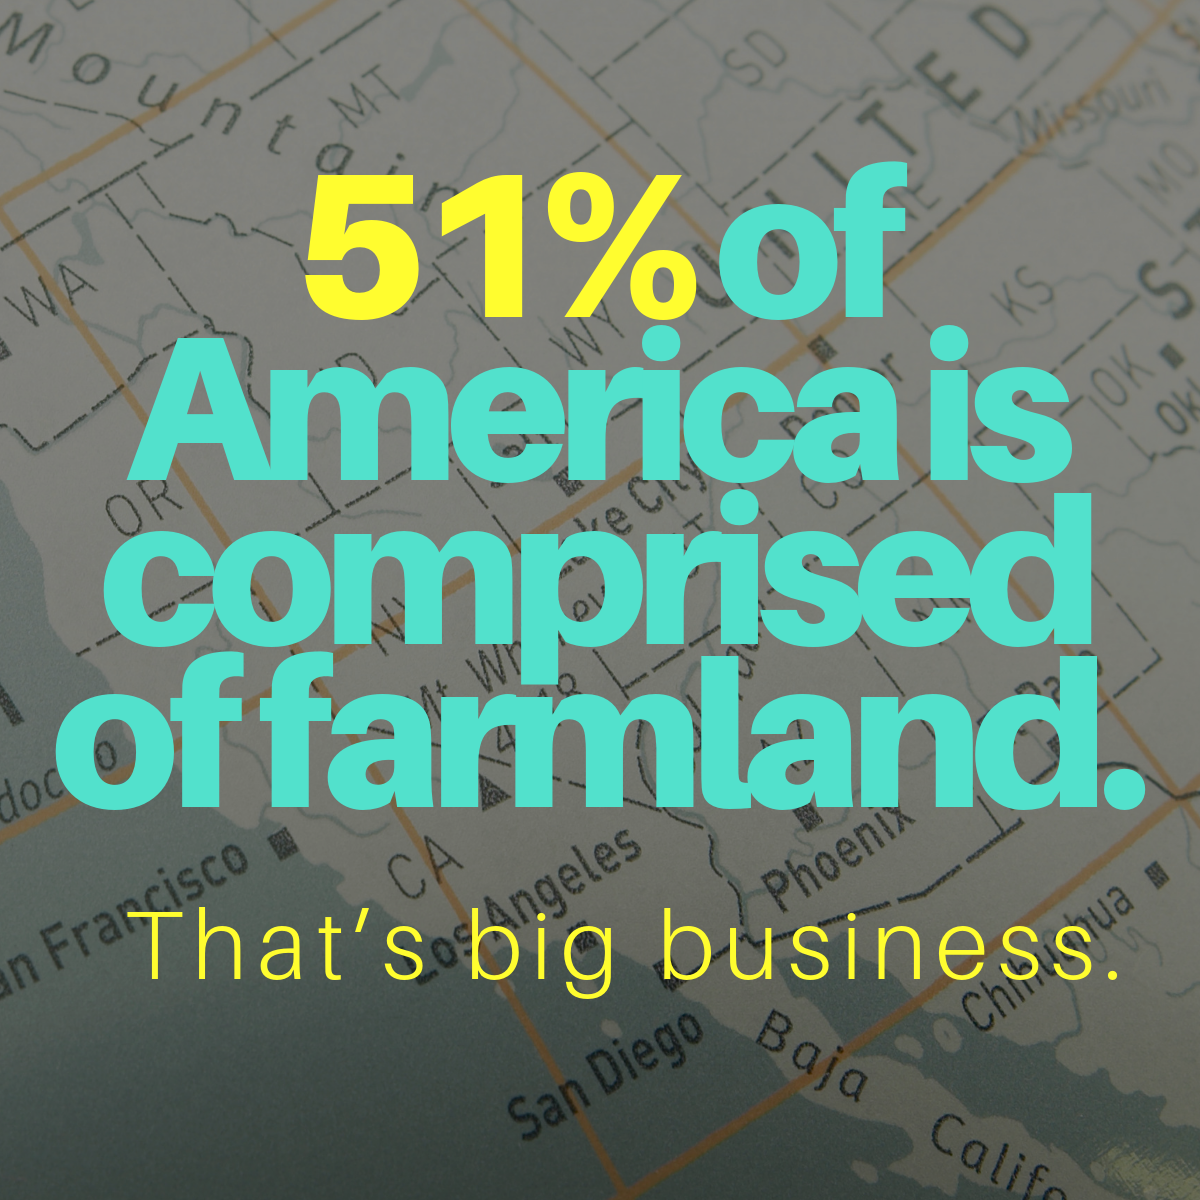 51% of America is comprised of farmland. That's big business.